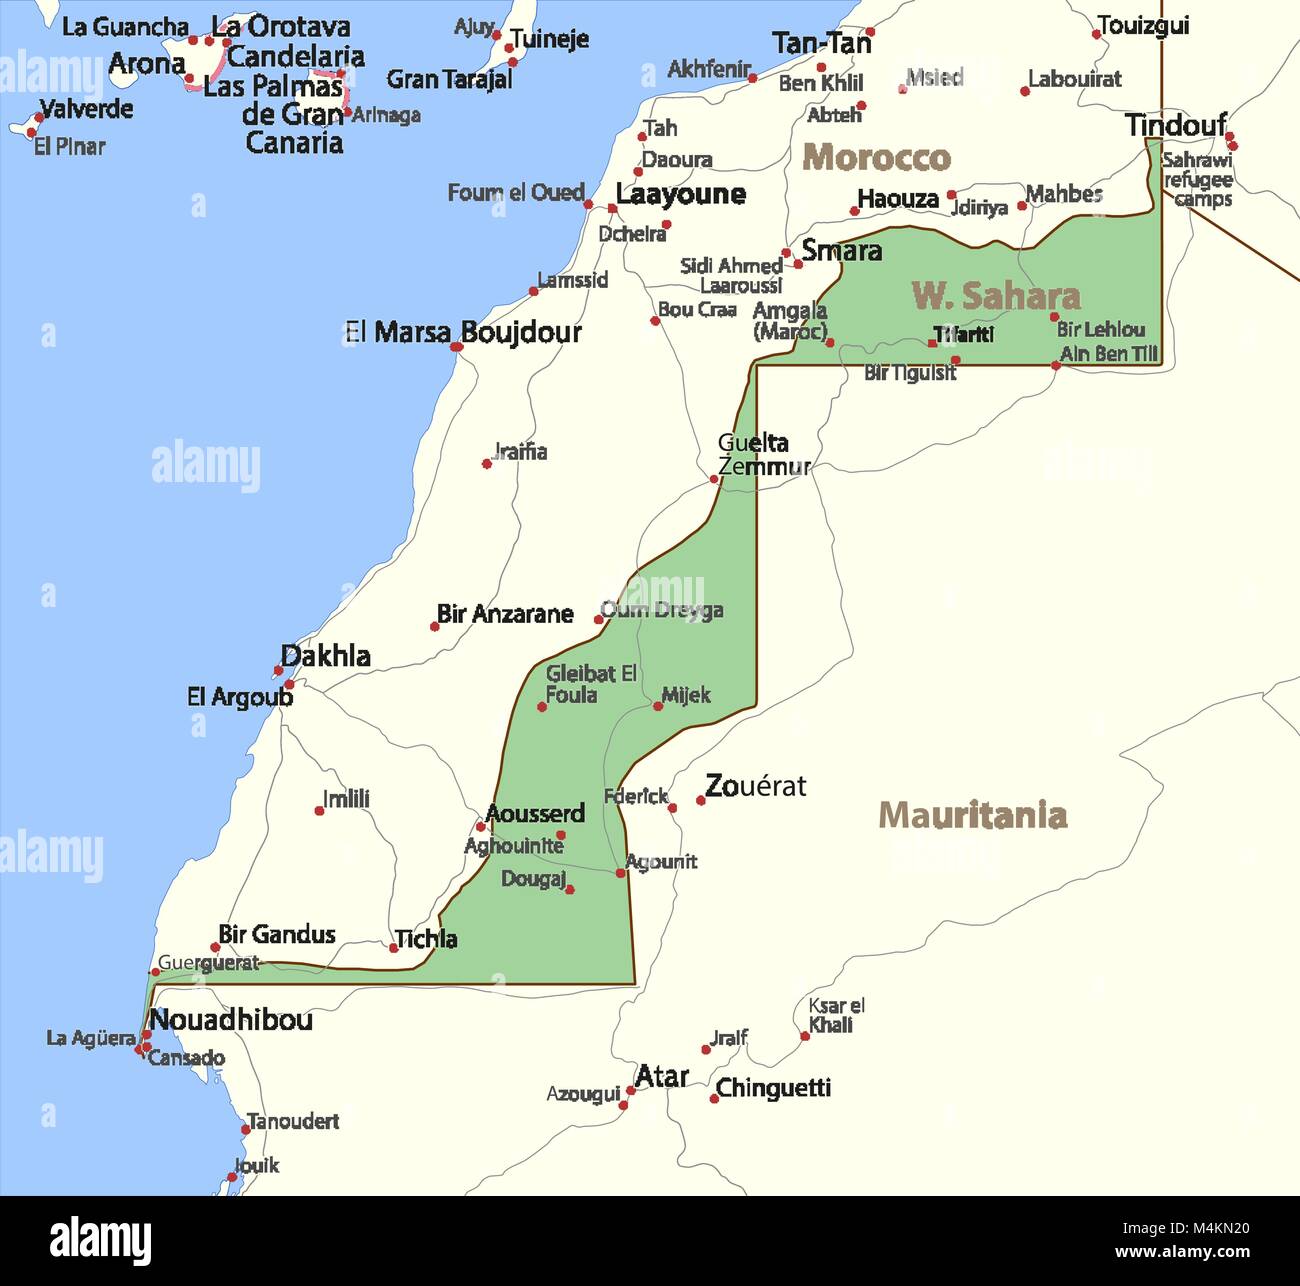 map-of-western-sahara-shows-country-borders-urban-areas-place-names